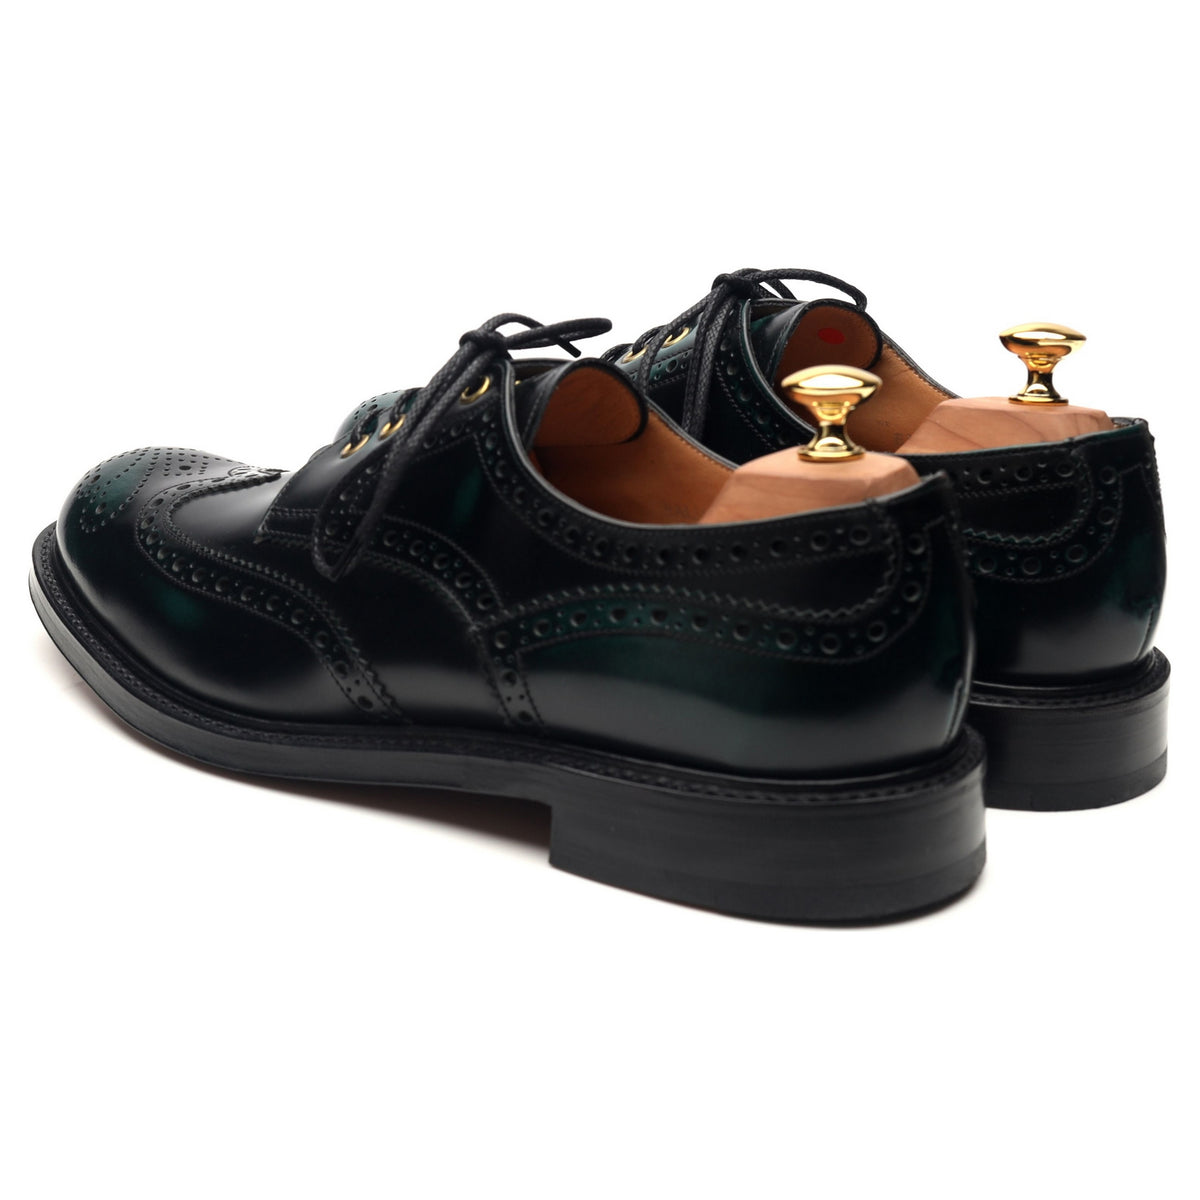 Russell &amp; Bromley &#39;Balmoral&#39; Dark Green Leather Derby Brogues UK 10.5 F